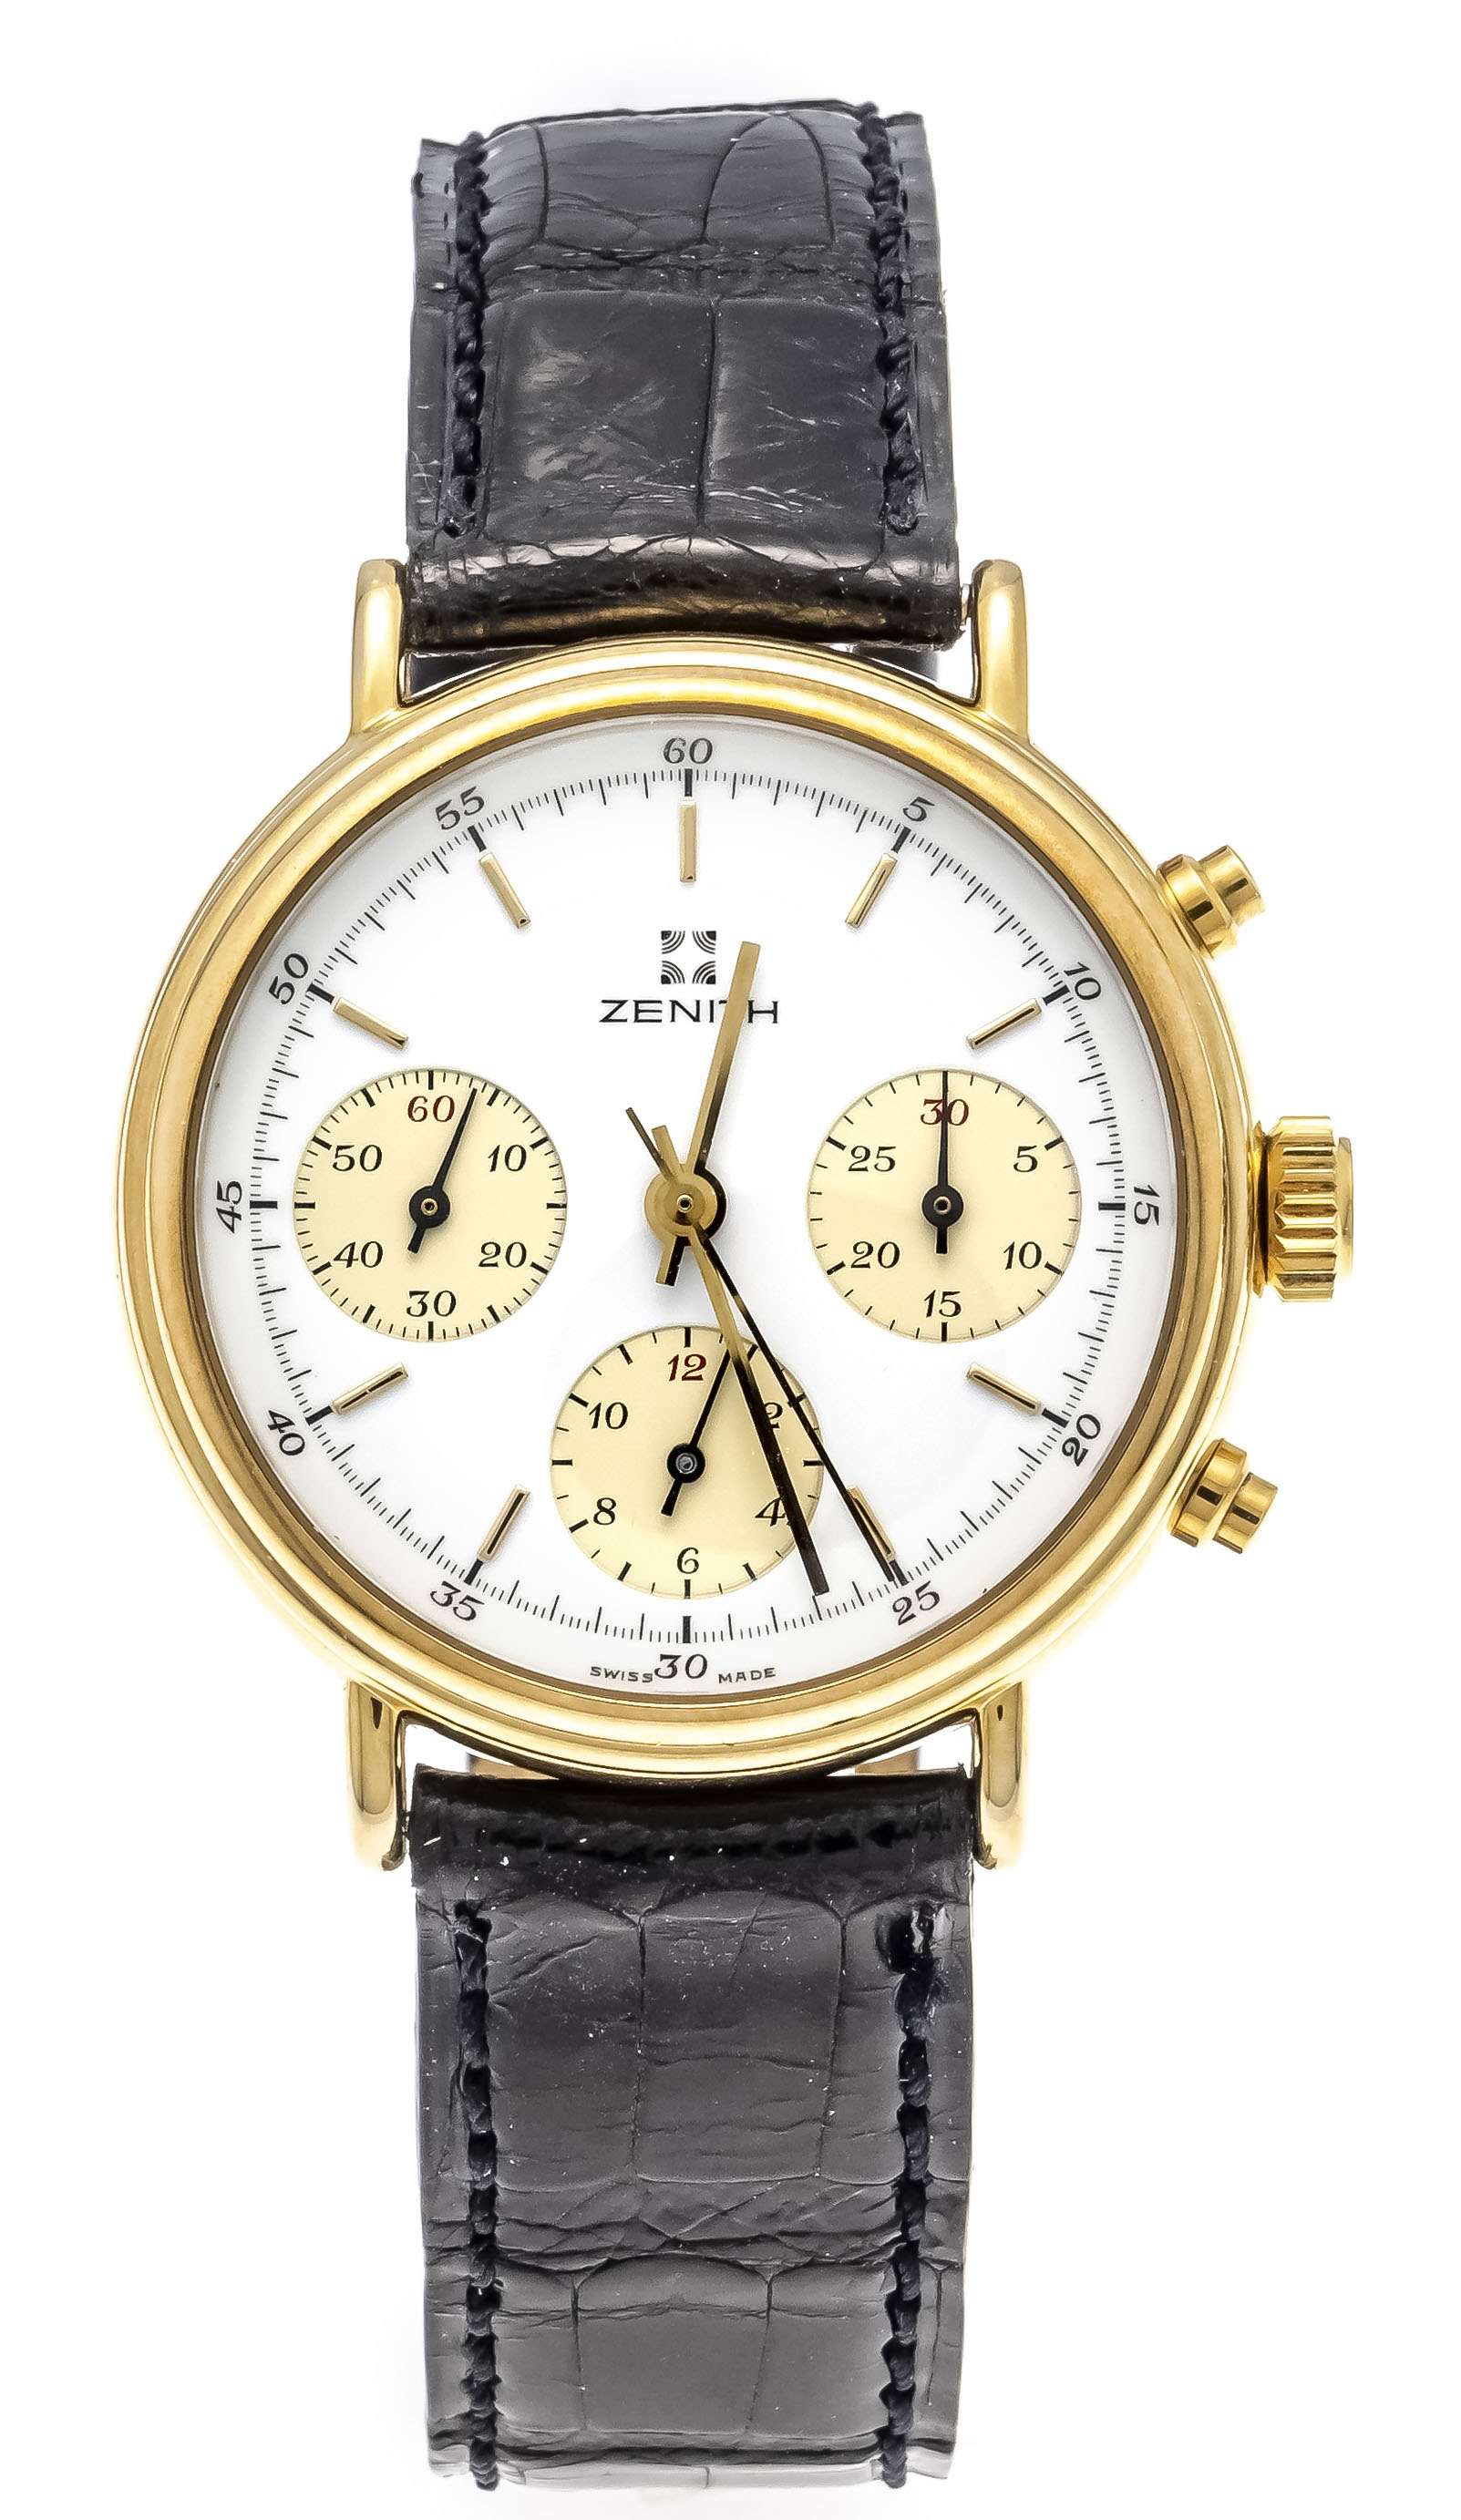 Zenith, chronograph, manual winding, Ref. 27.0140.203, circa 1990, gold-plated case with 40ym, white